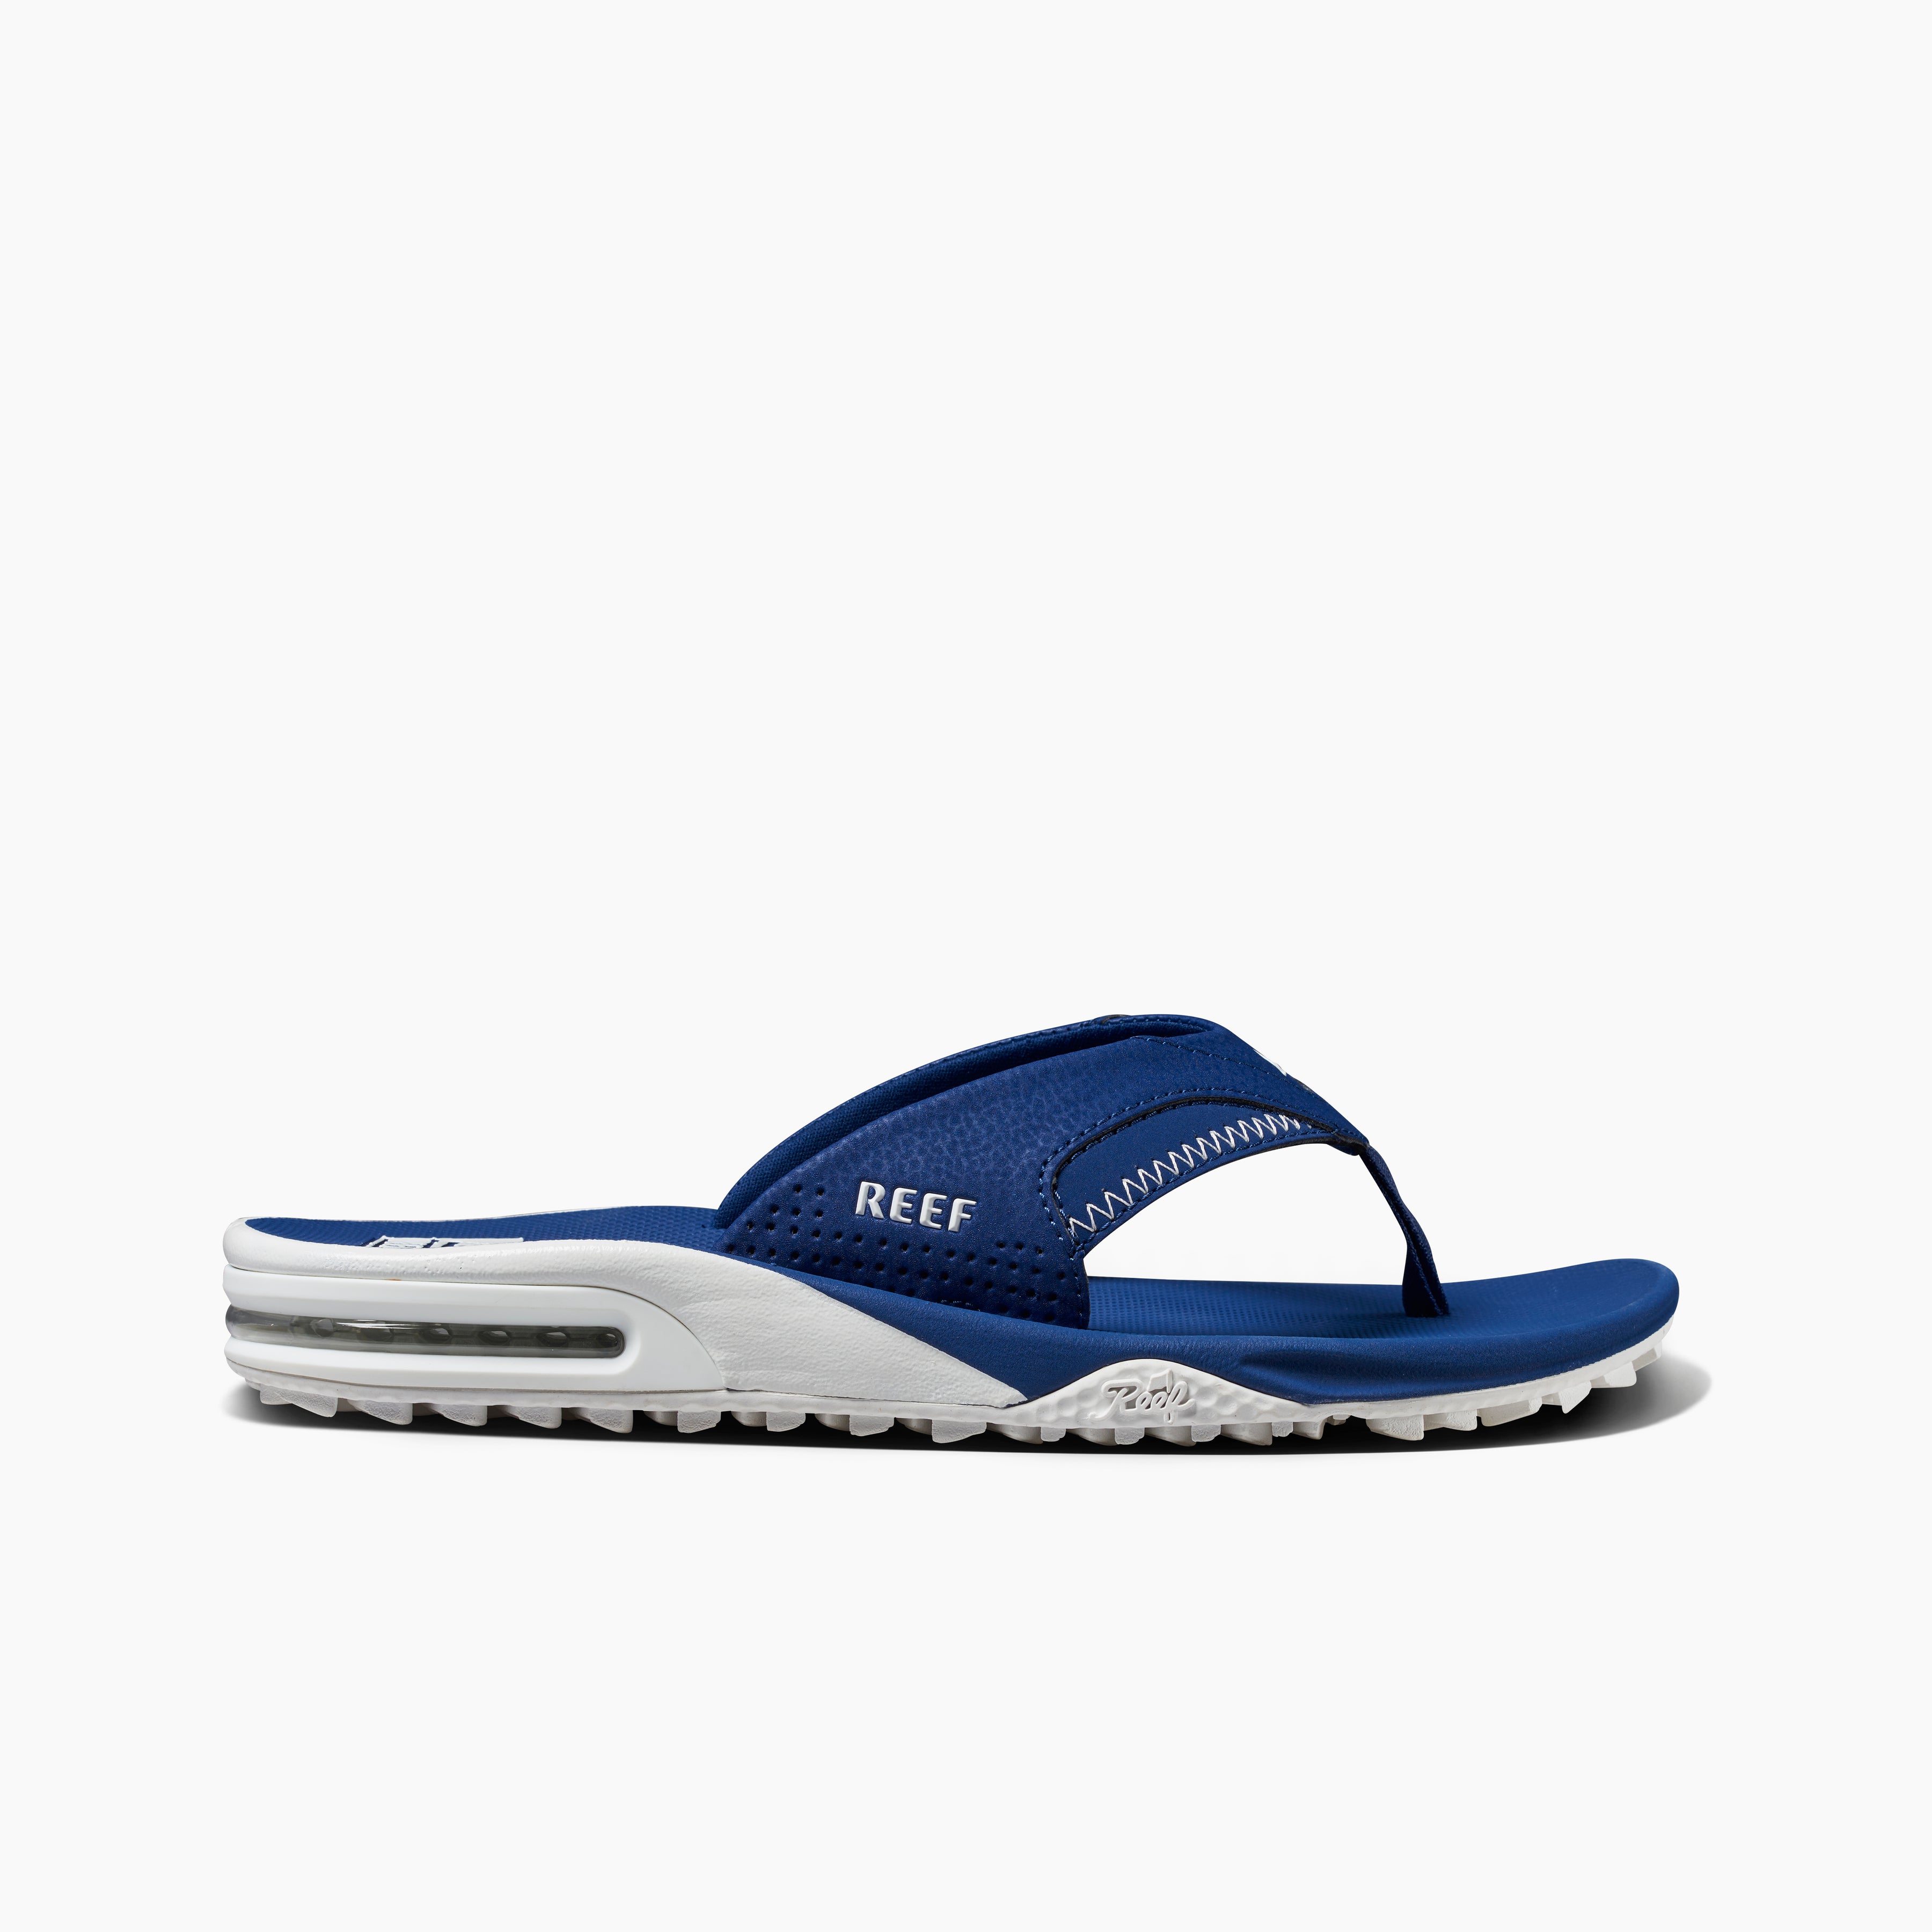 Fanning Tailgate Navy/White Men's Sandals side view